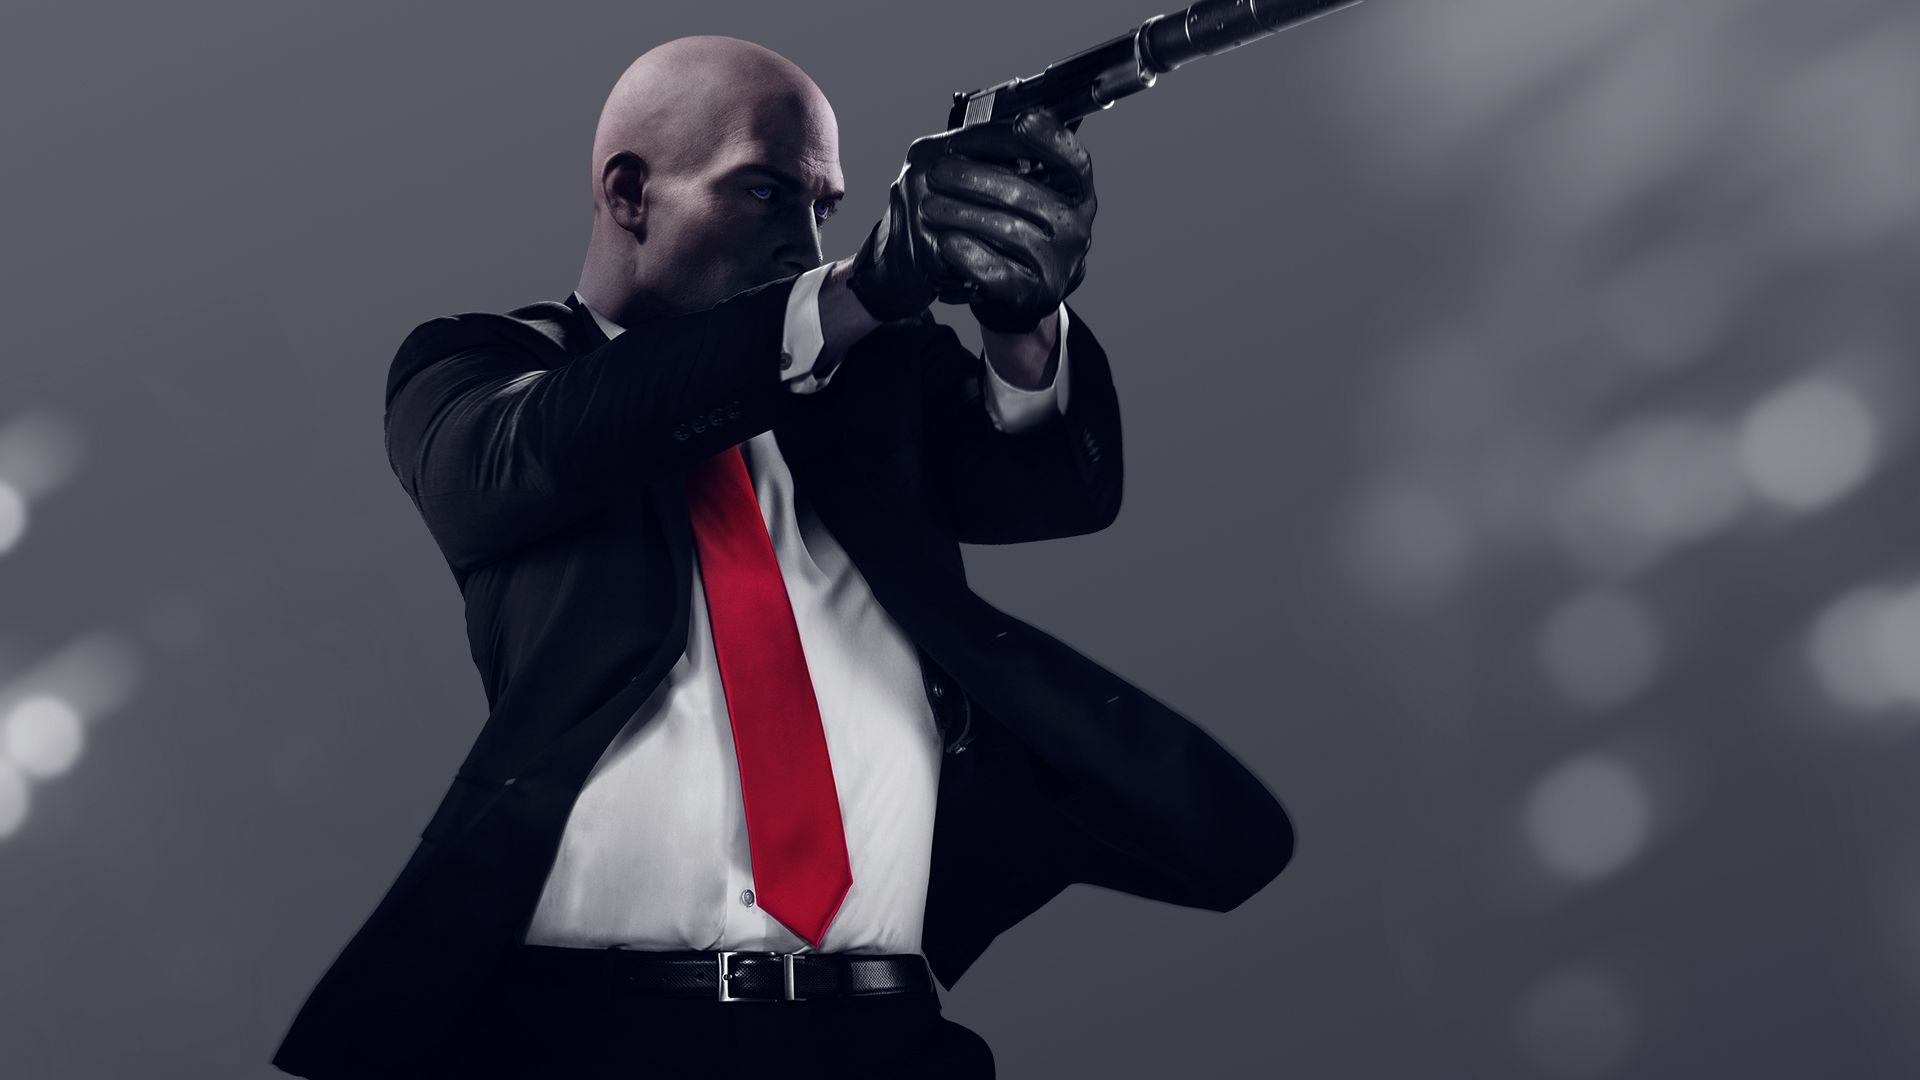 download hitman mobile apk for free